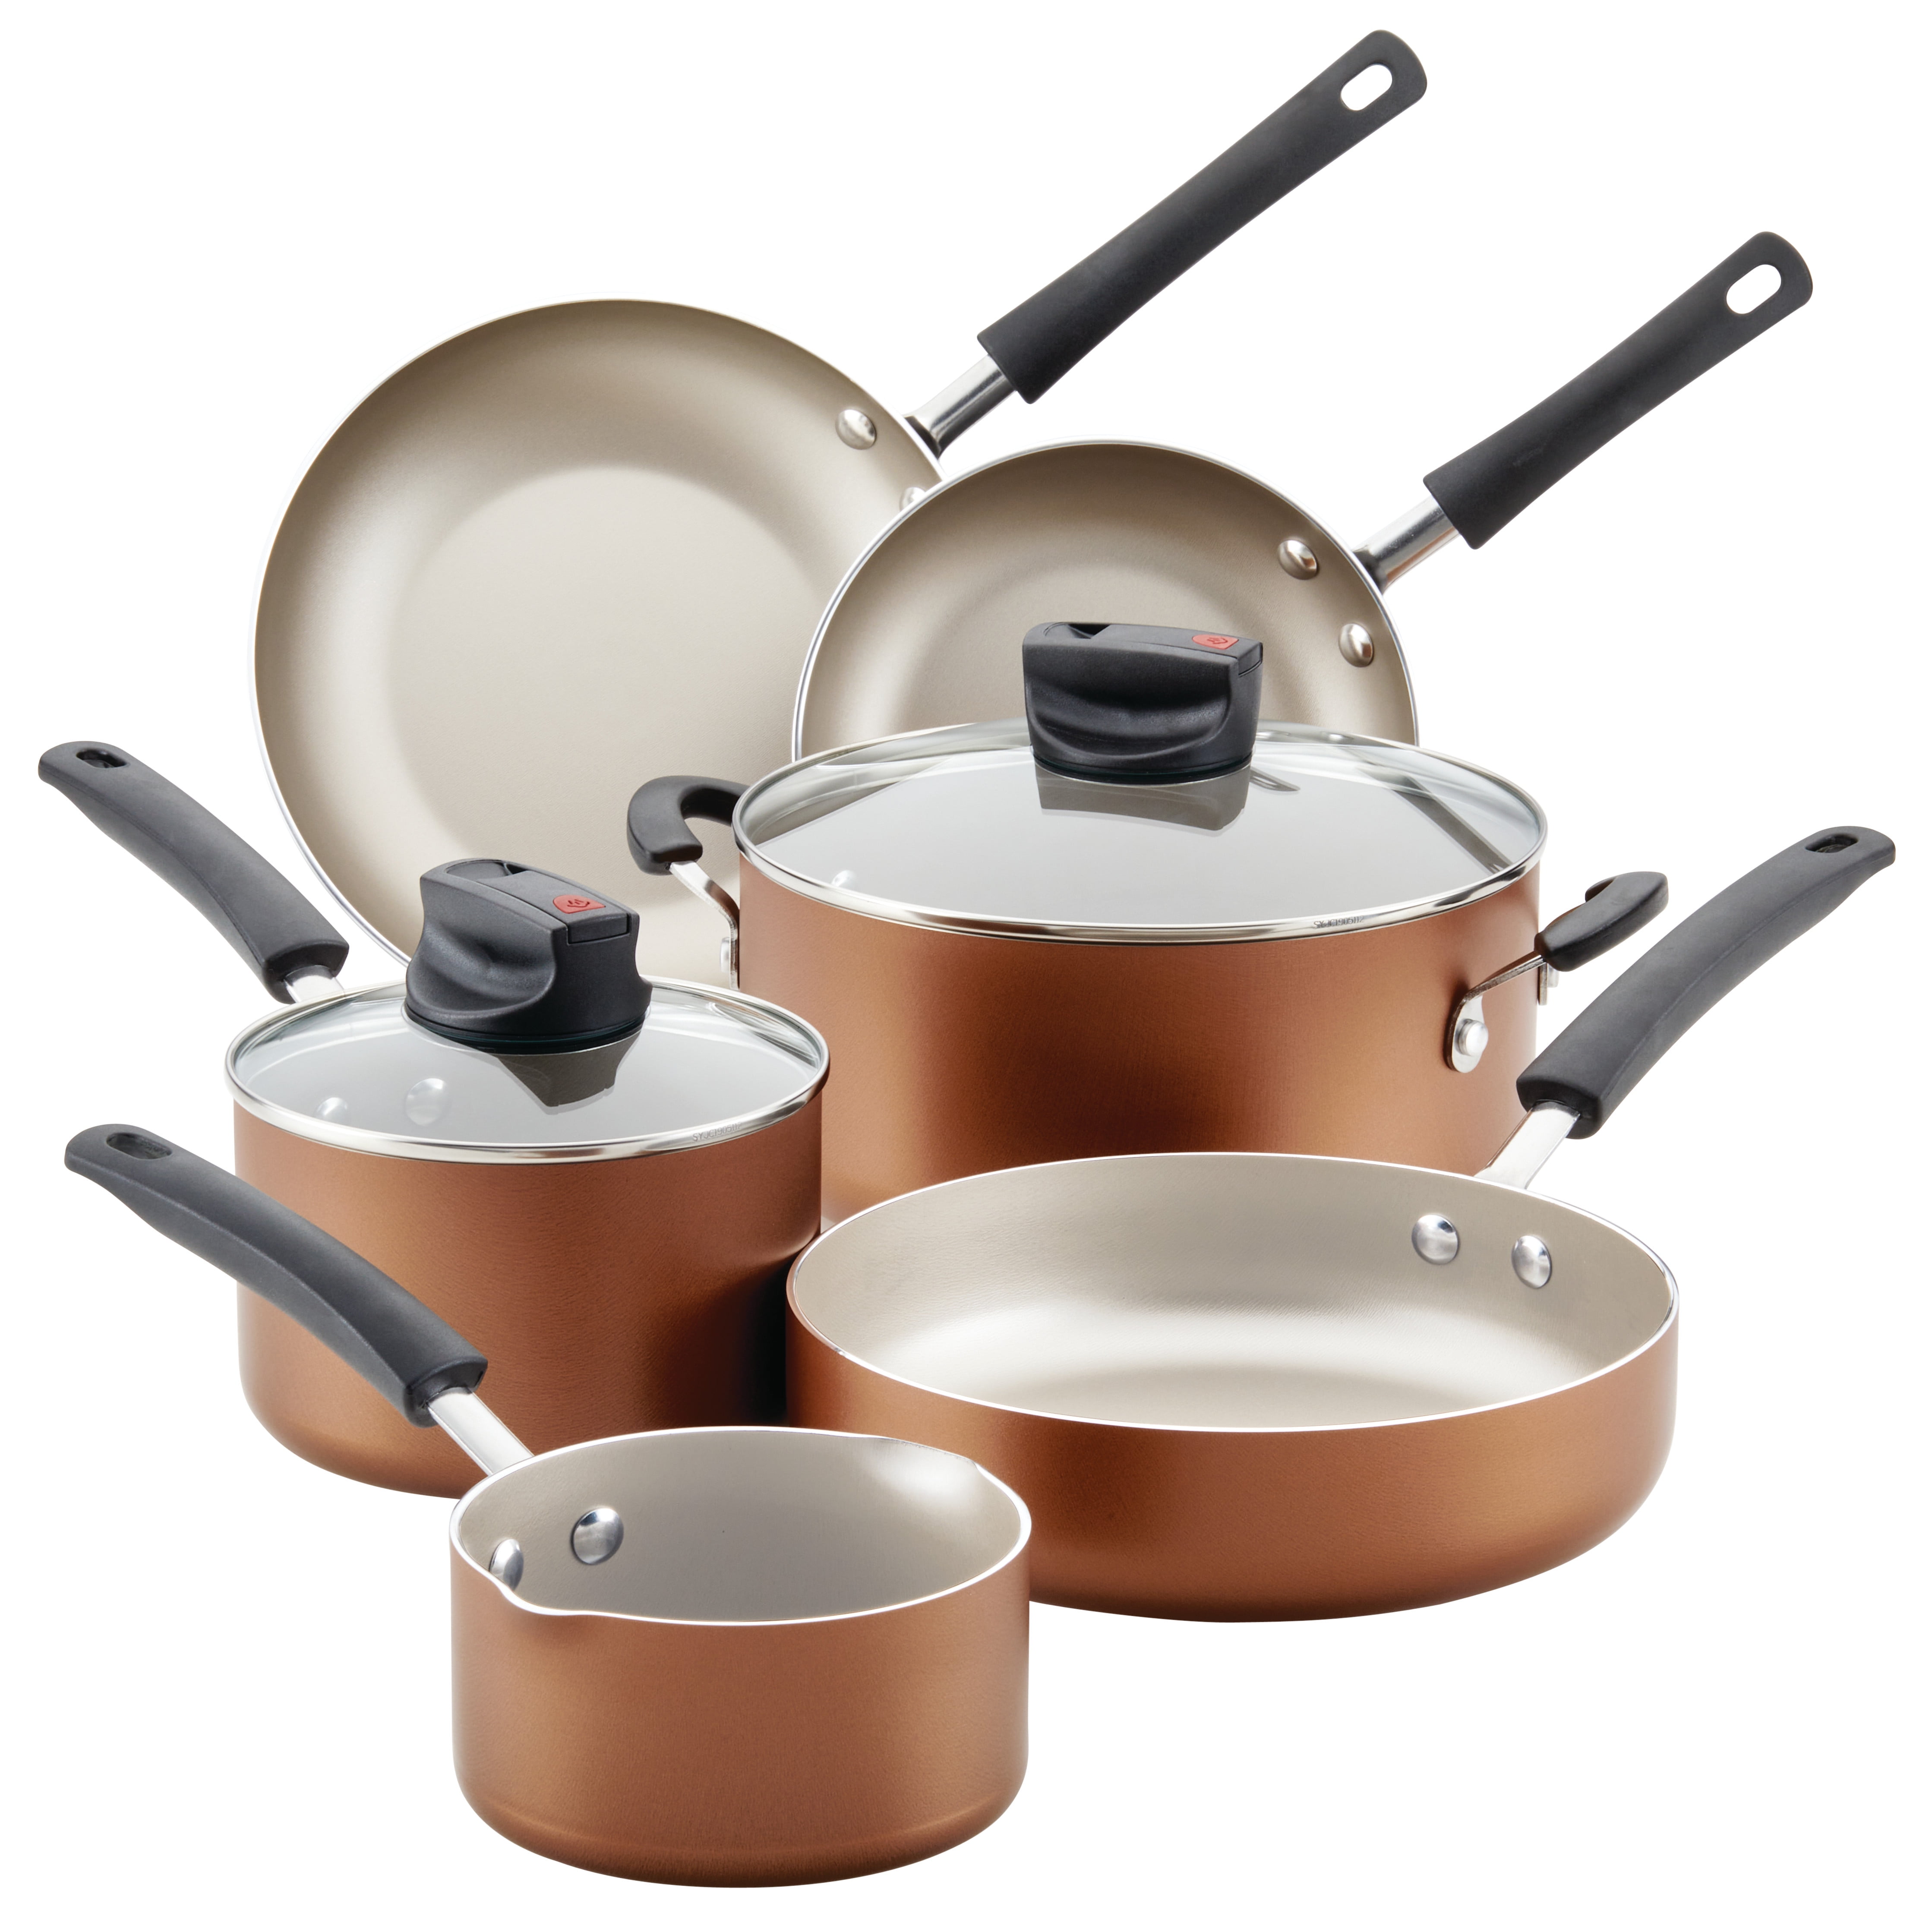 Source Purple color Cookware set 2021 hot selling with non stick frying pan  set and soup pot with cooking pots on m.